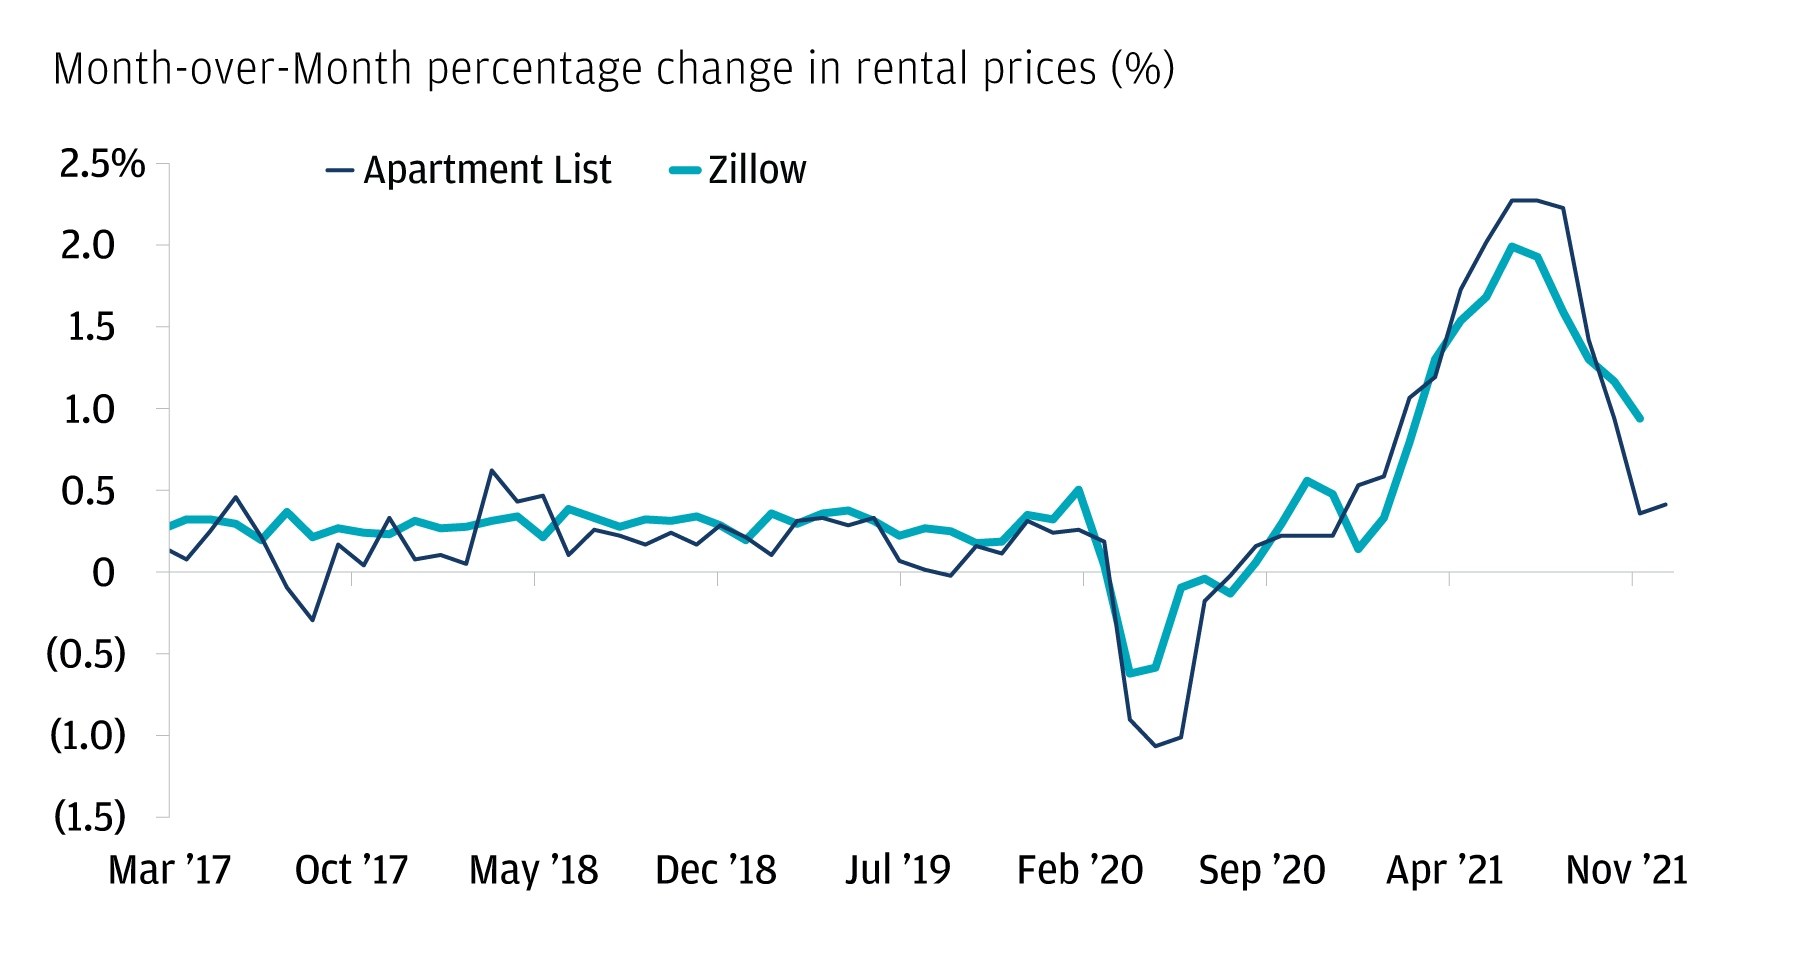 Month-over-month percent change of rental prices